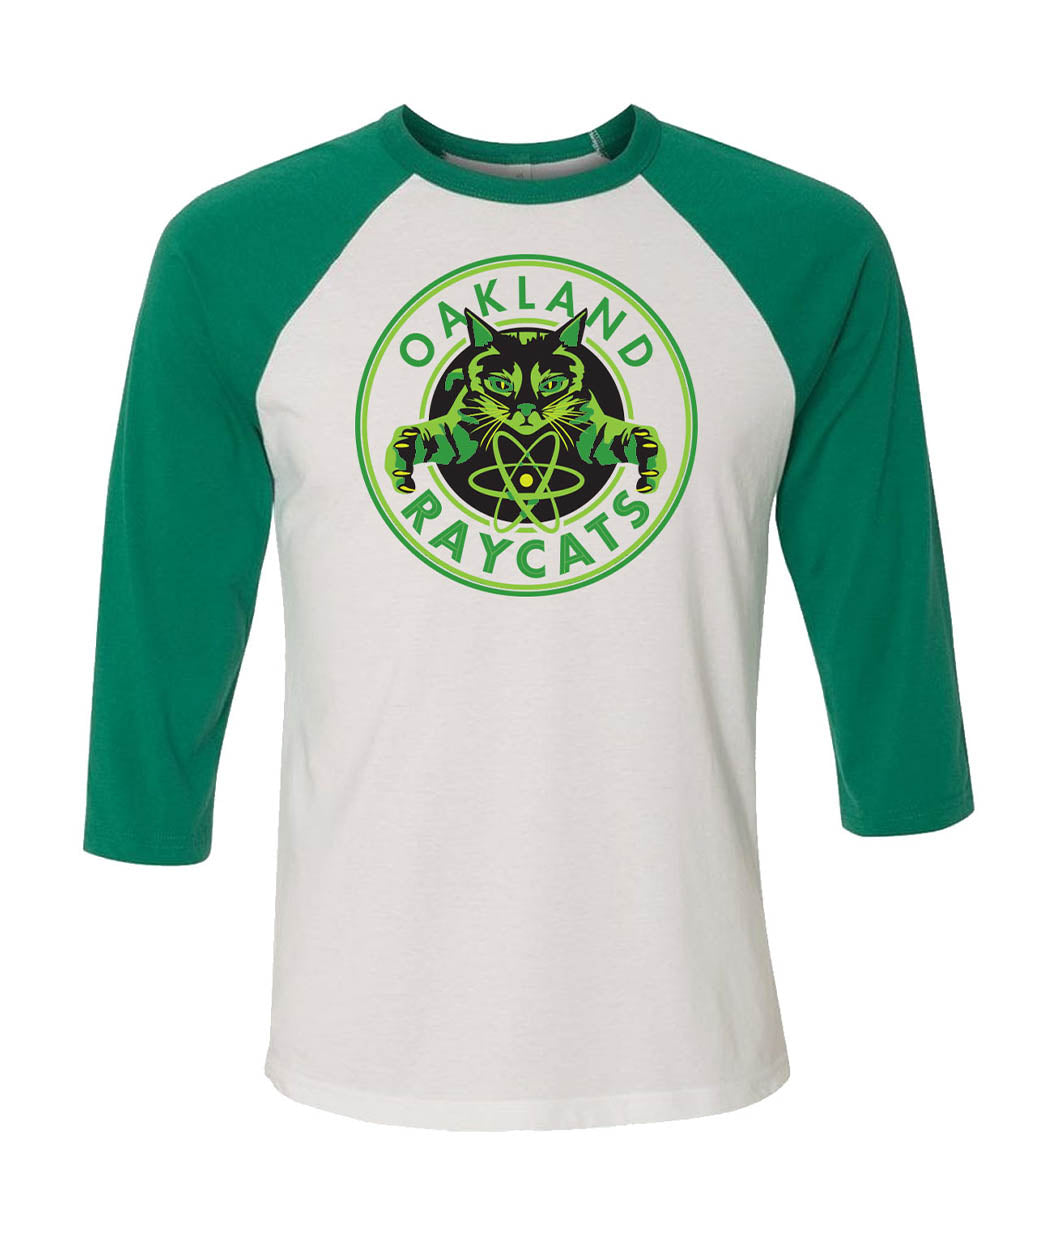 A white baseball shirt with teal sleeves. It features a green and black cat as part of the 